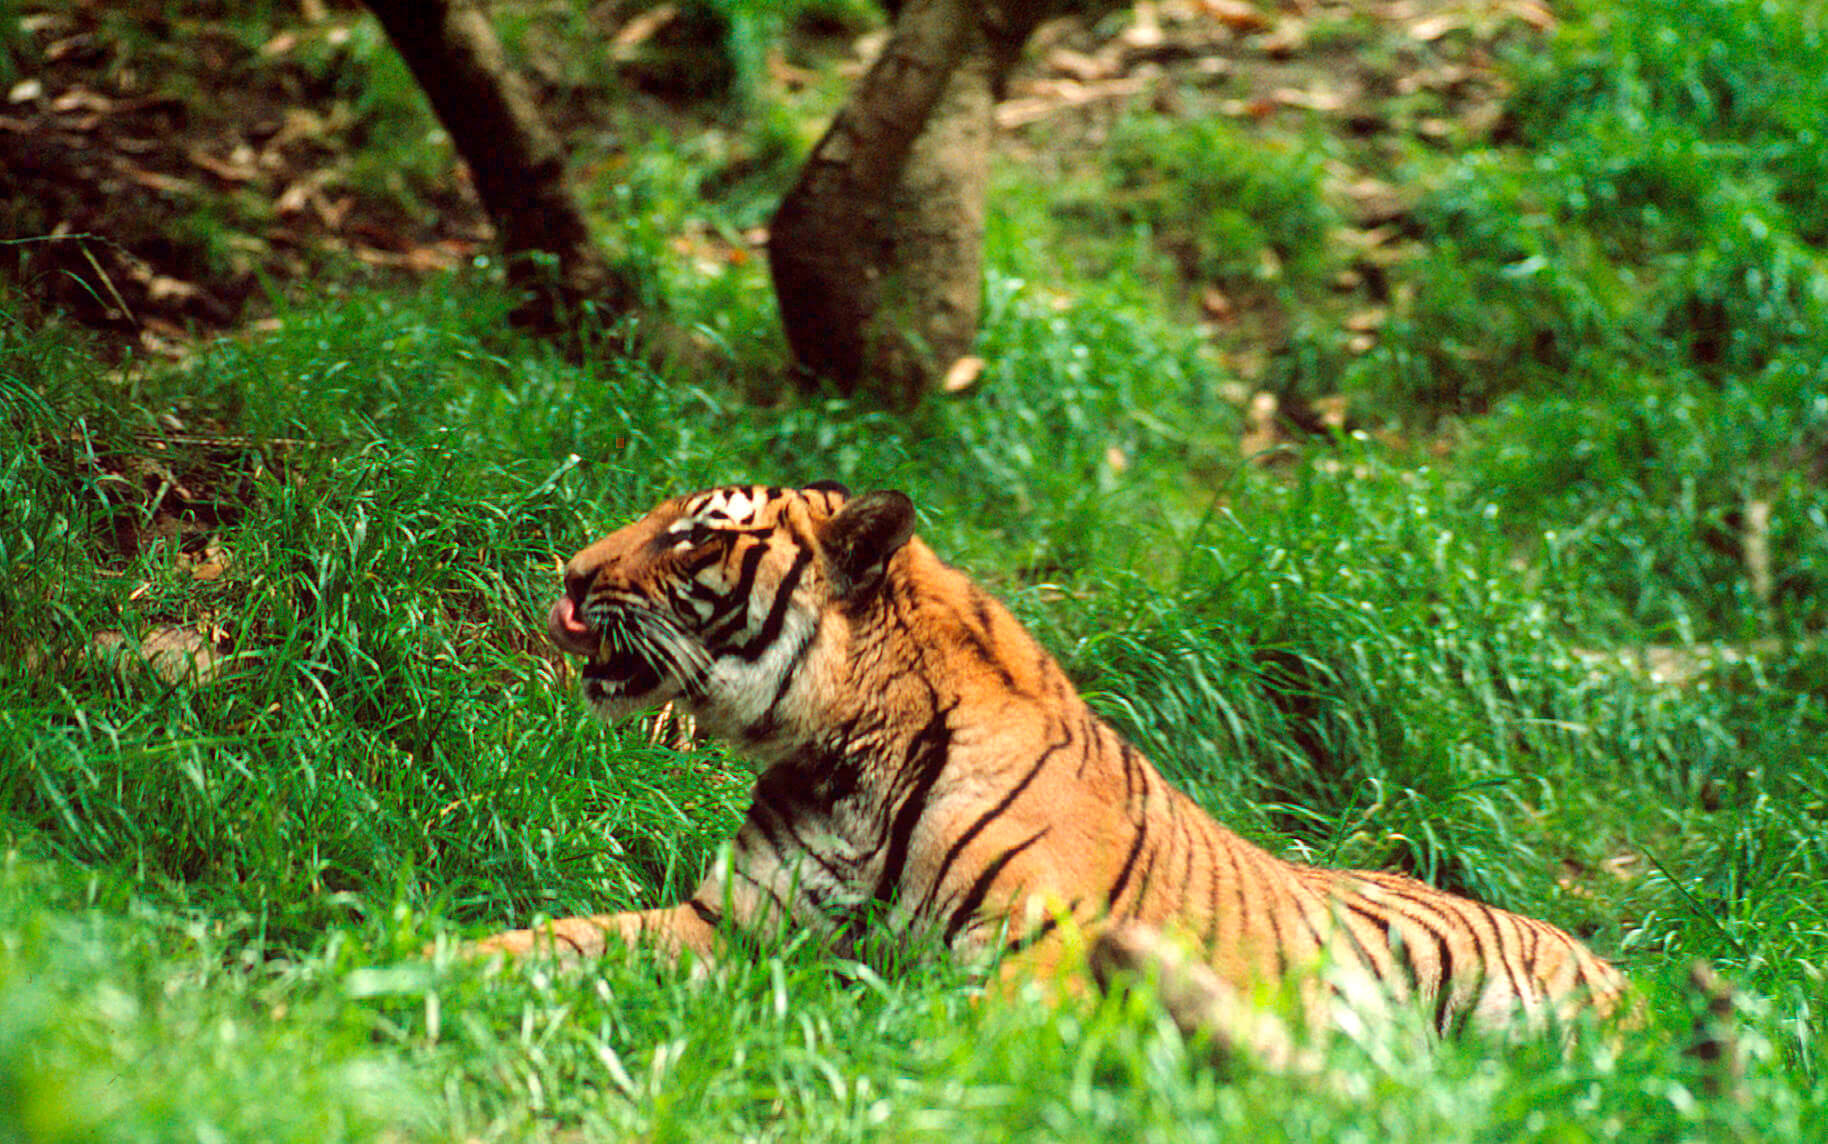 A tiger lying on the grass